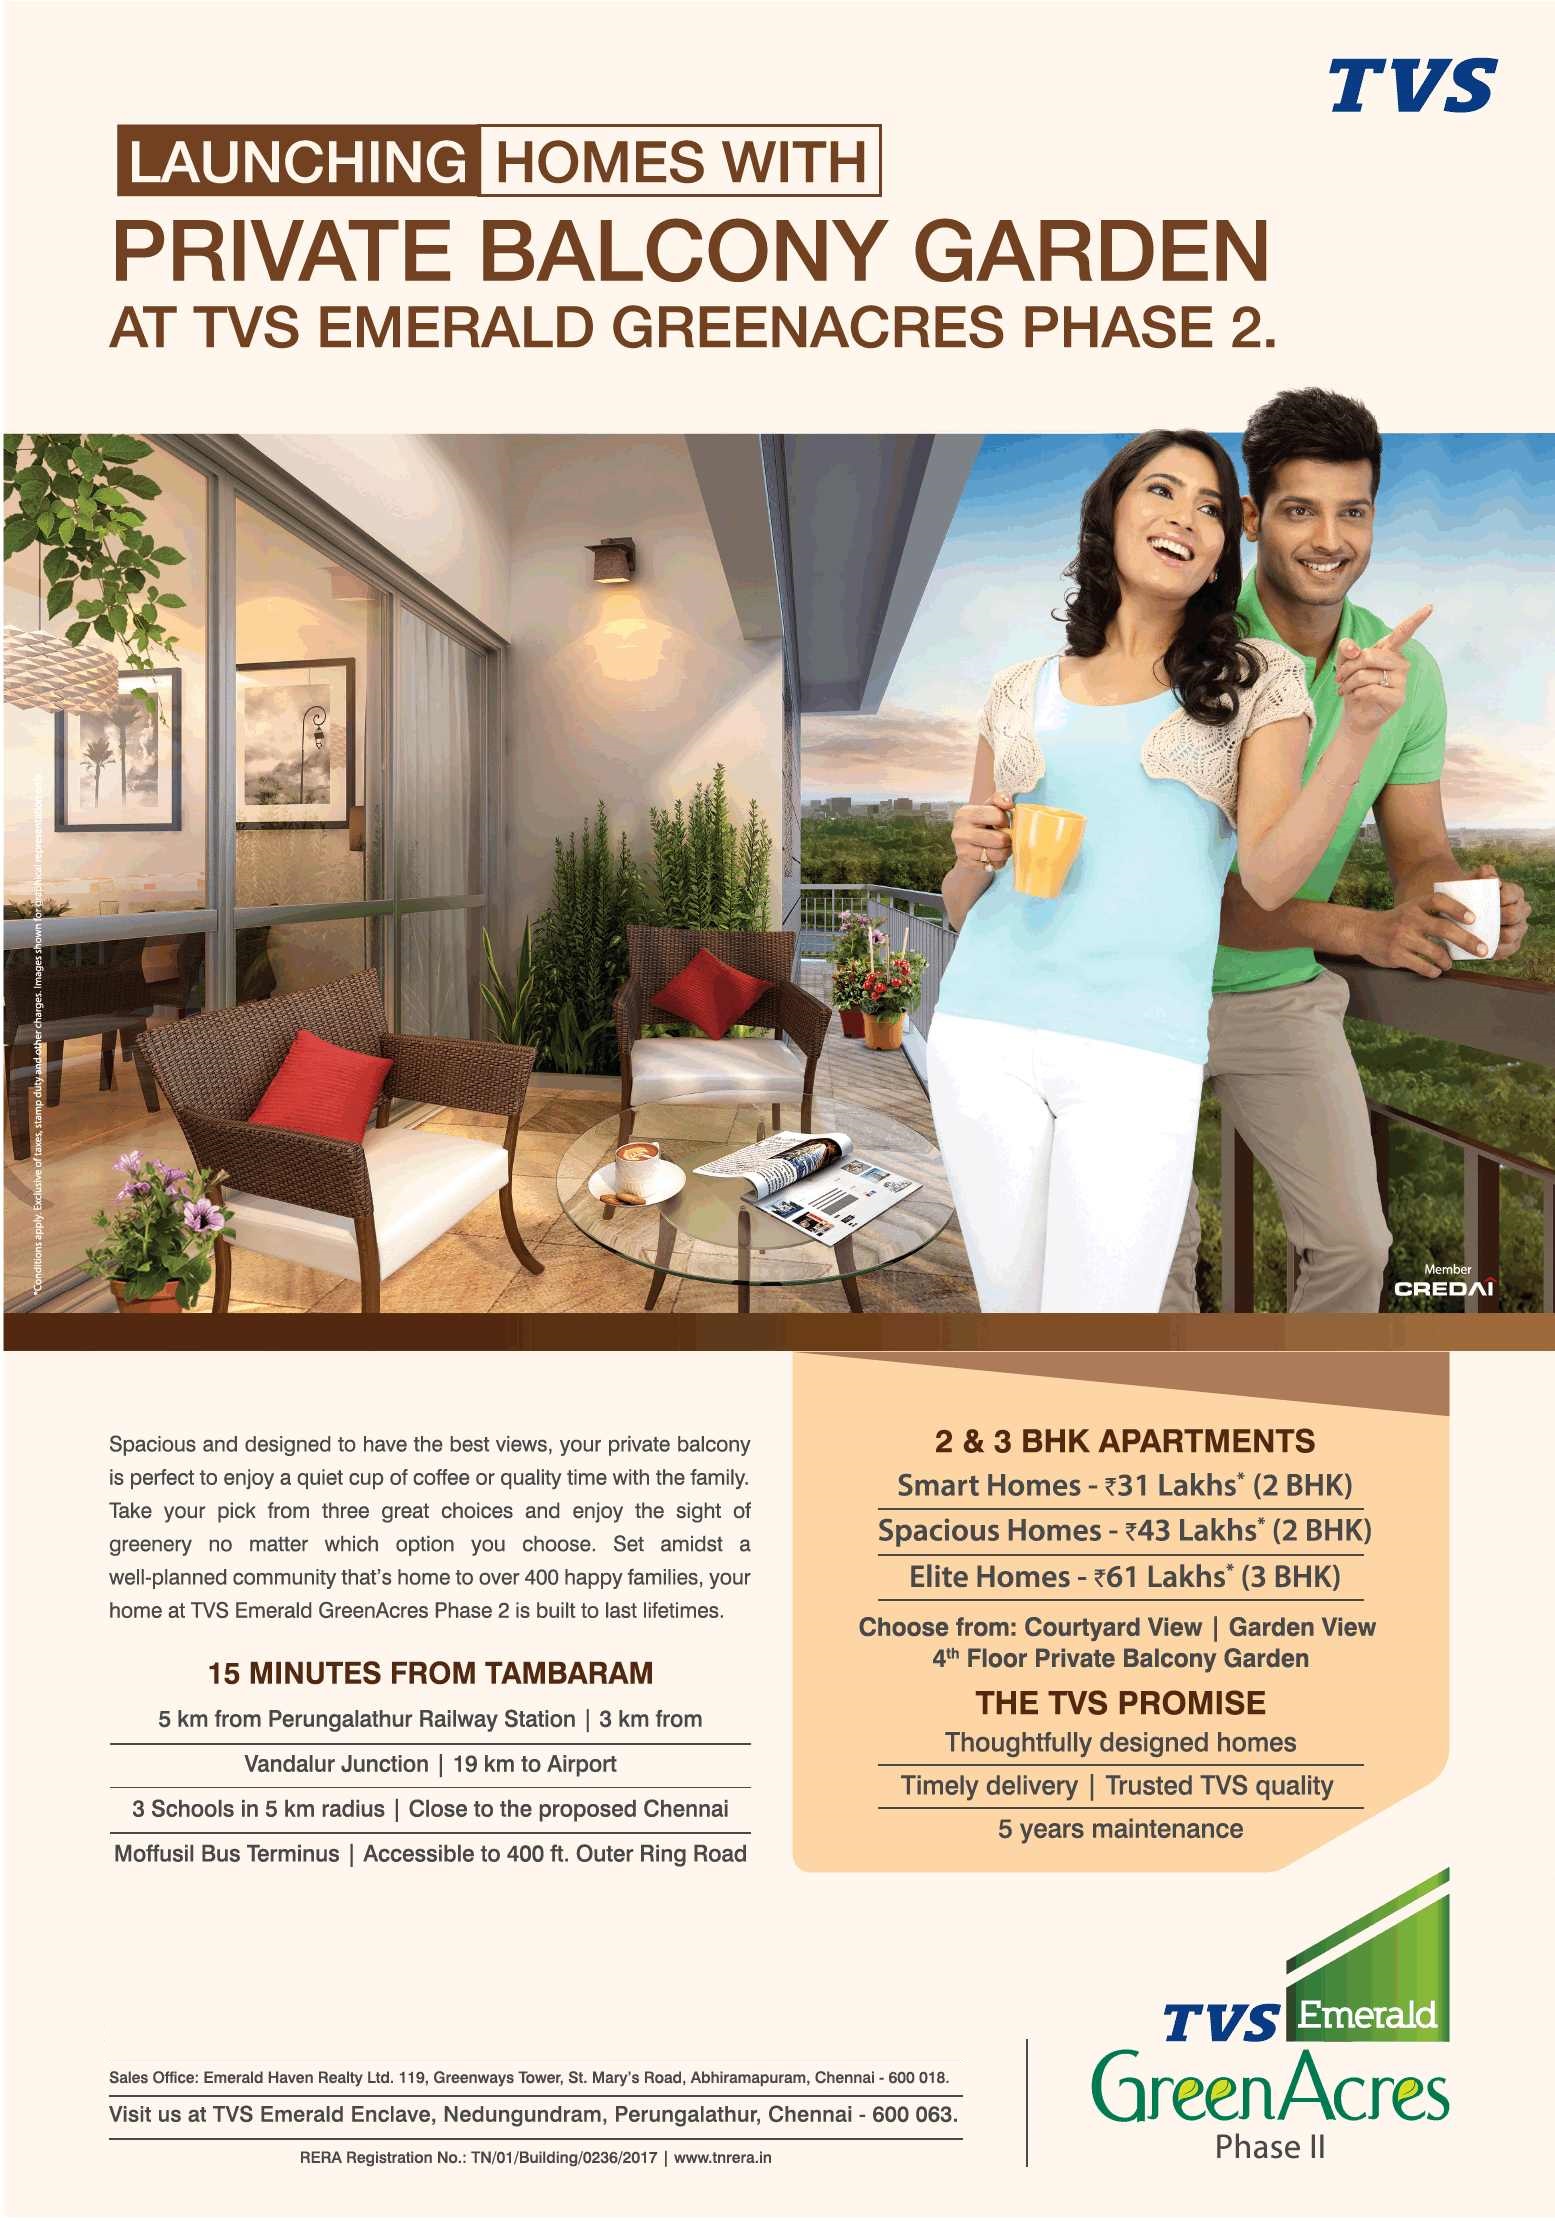 Launching homes with private balcony gardens at TVS Emerald Green Acres in Chennai Update